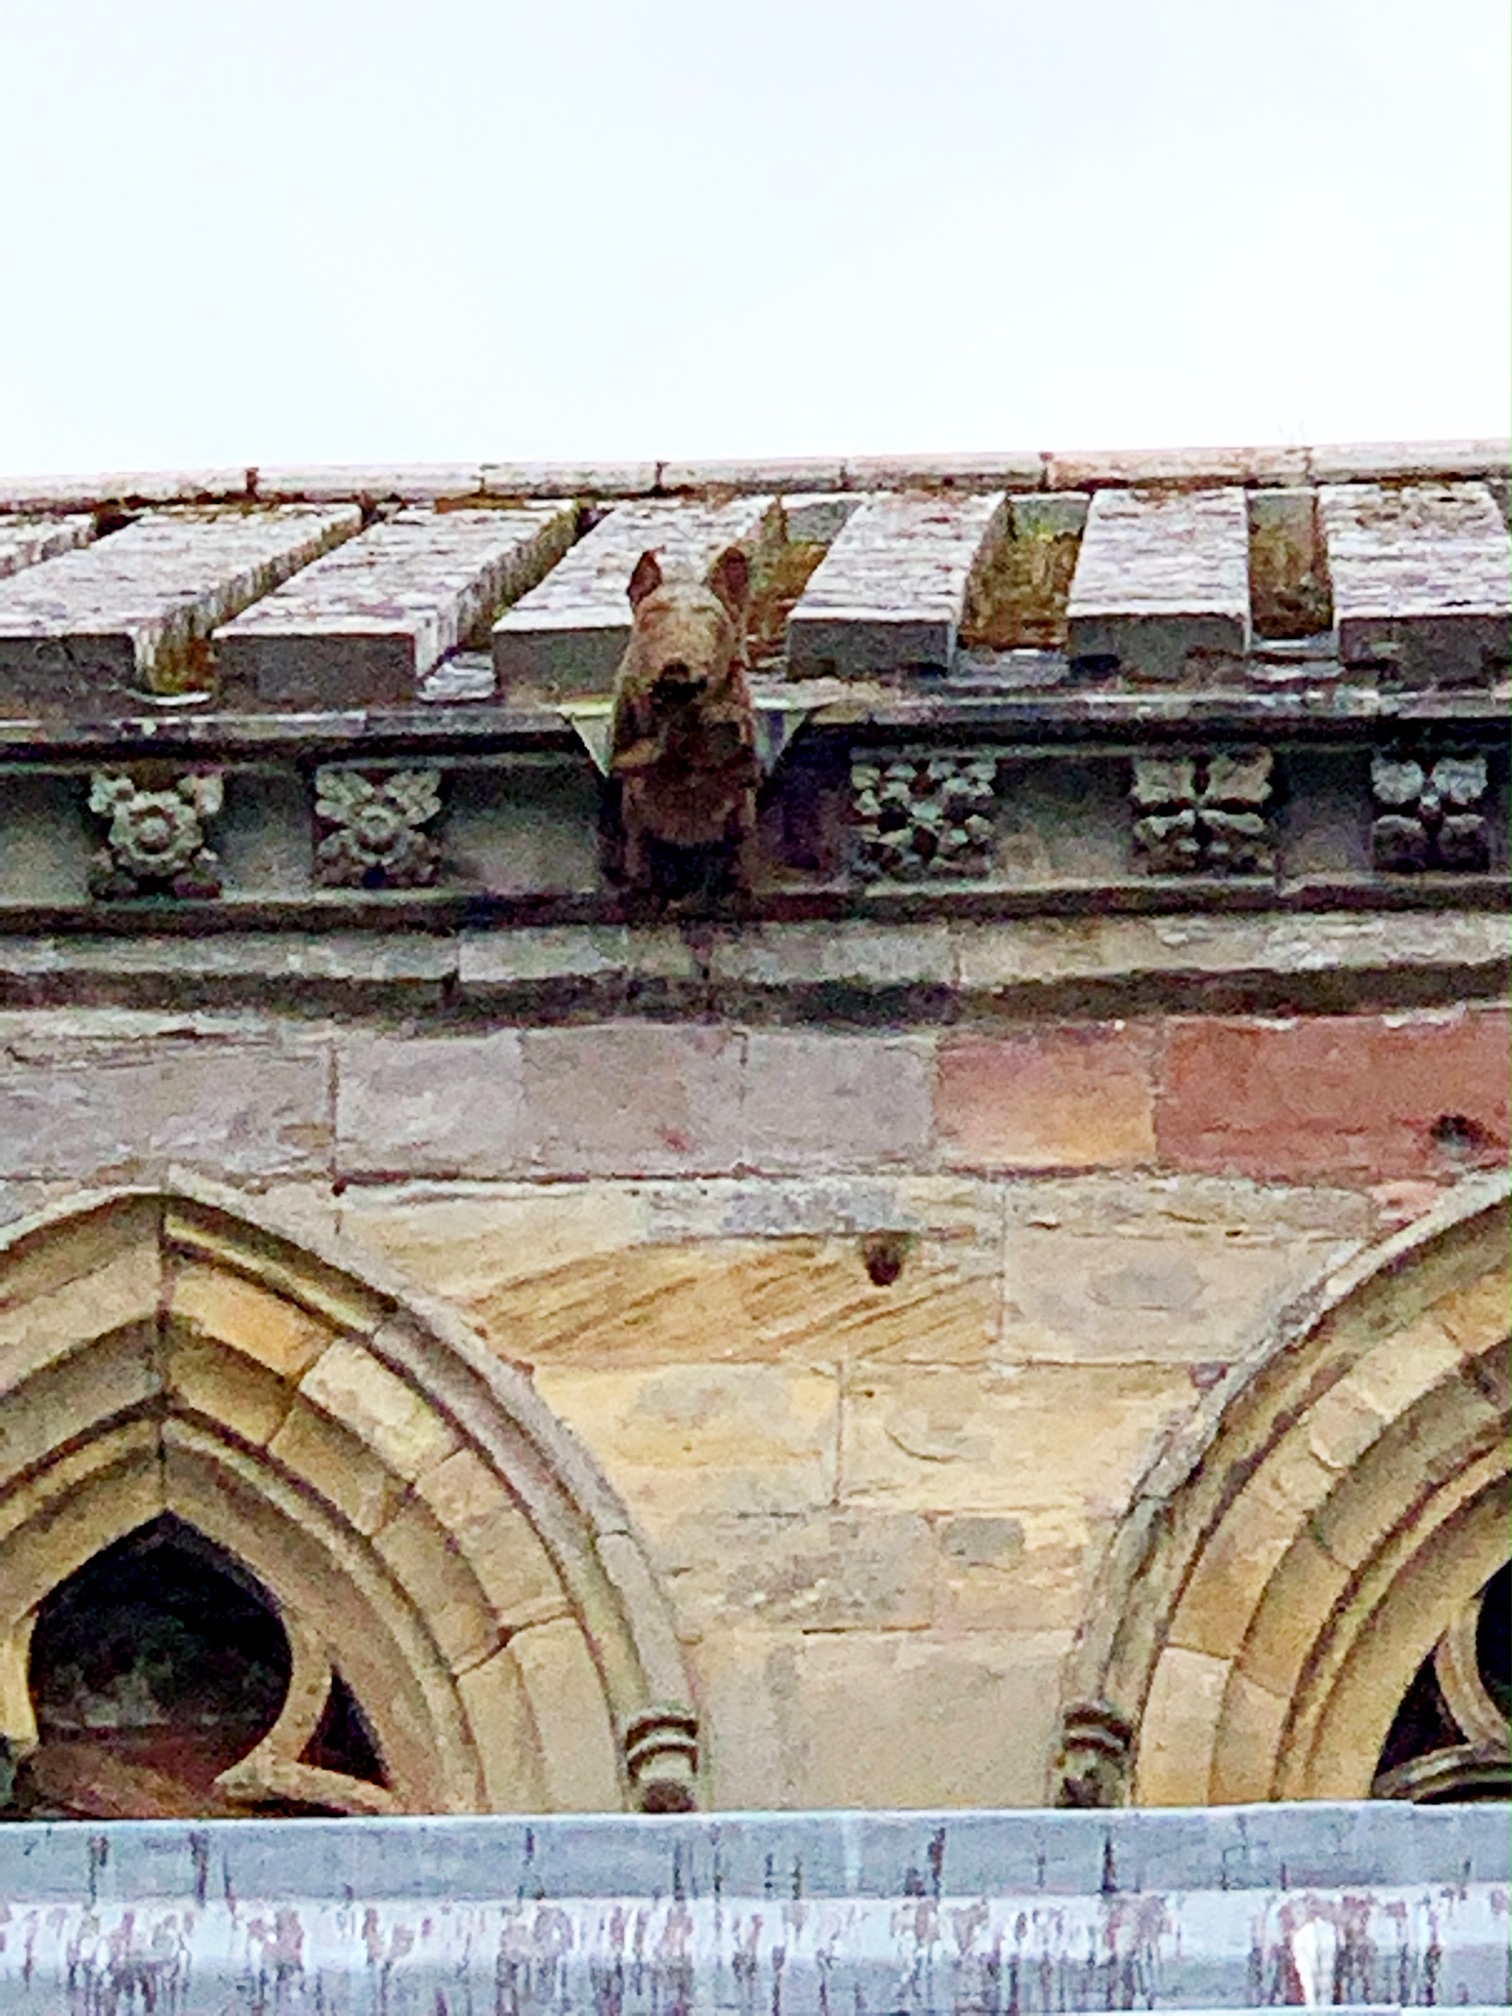 A statue of a pig playing the bagpipe at Melrose Abbey